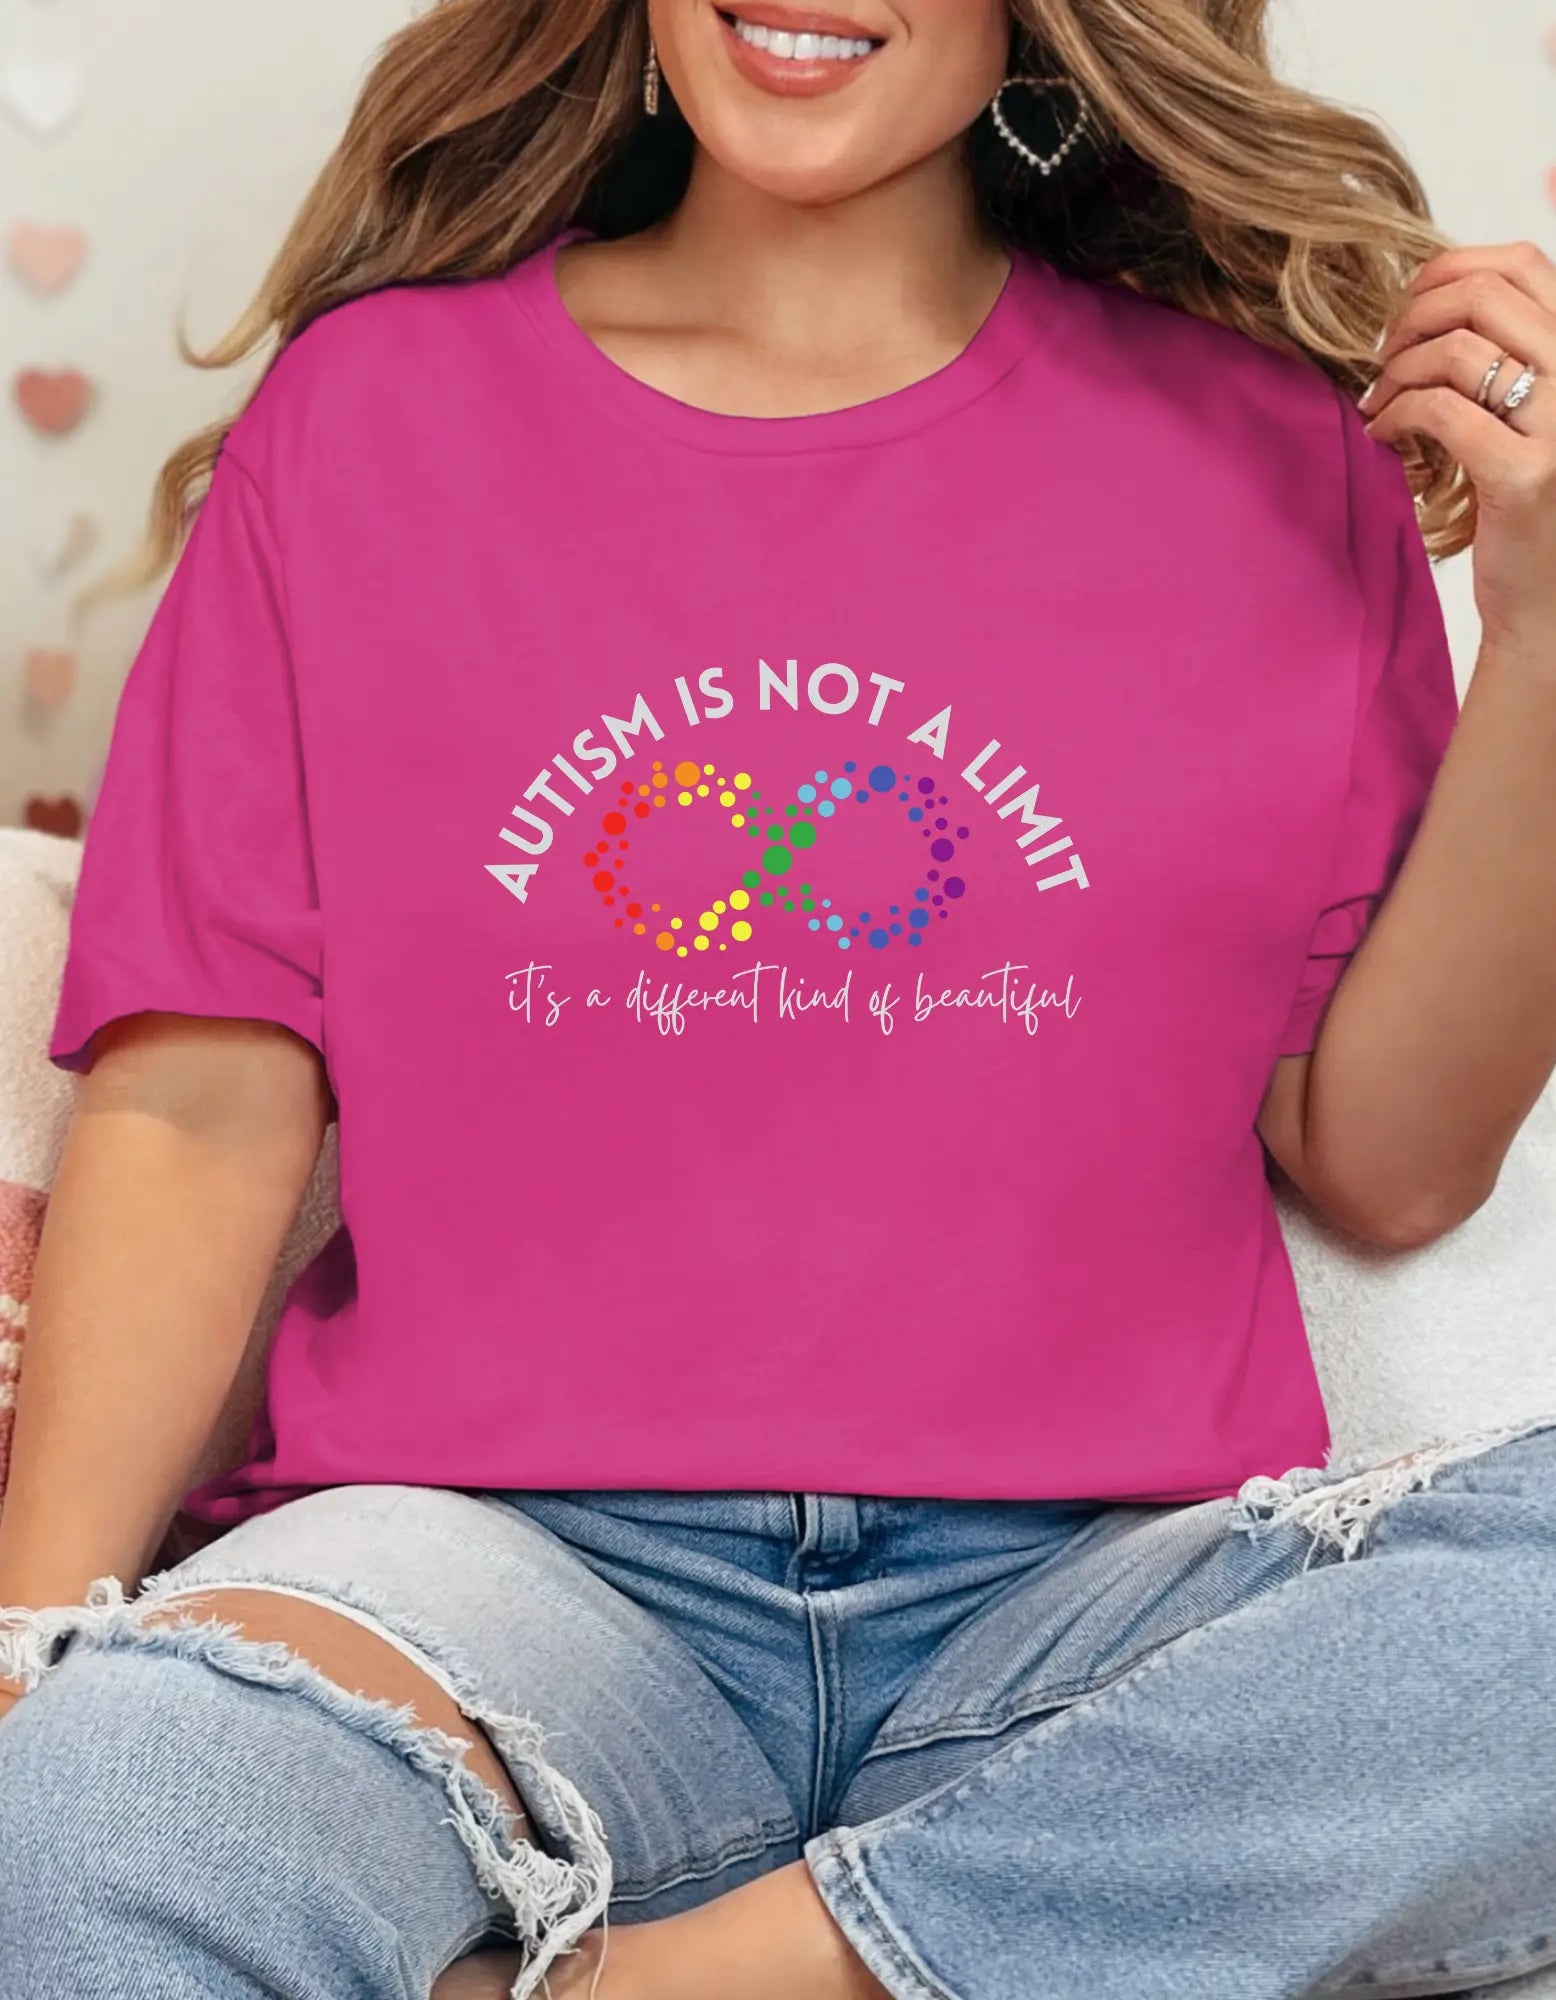 Autism Acceptance Shirt, Autism Mom Gift, Inspirational Shirt, Gift for Friend with Autism, Autism Mom Shirt, Neurodiversity, Women's Tee Affordable ABA Materials